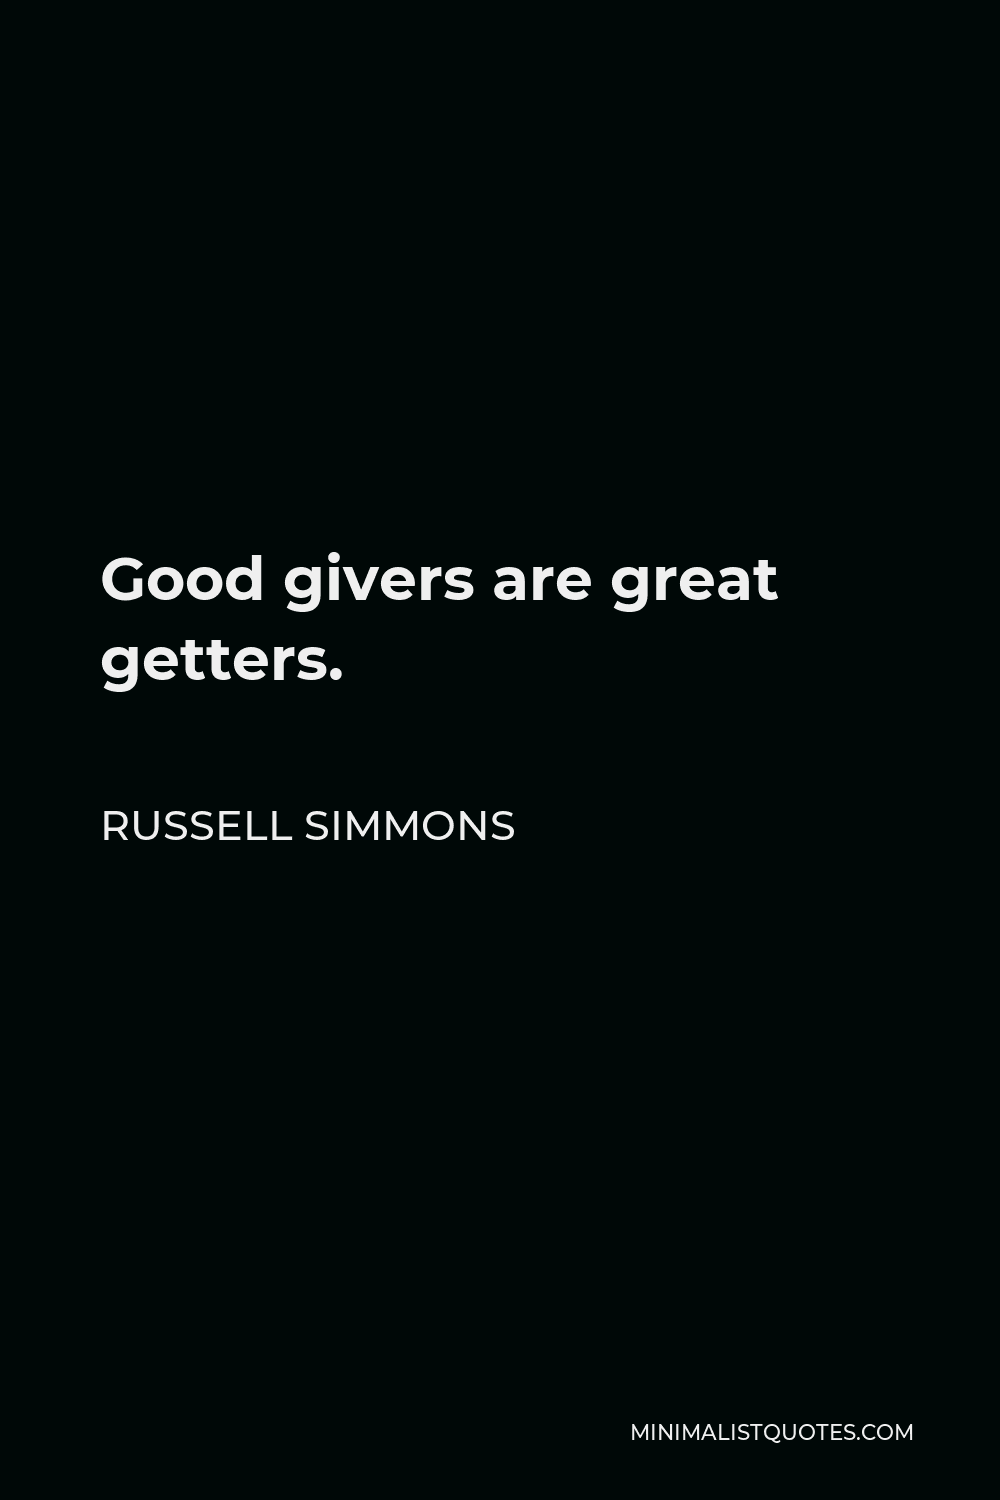 Russell Simmons Quote - Good givers are great getters.